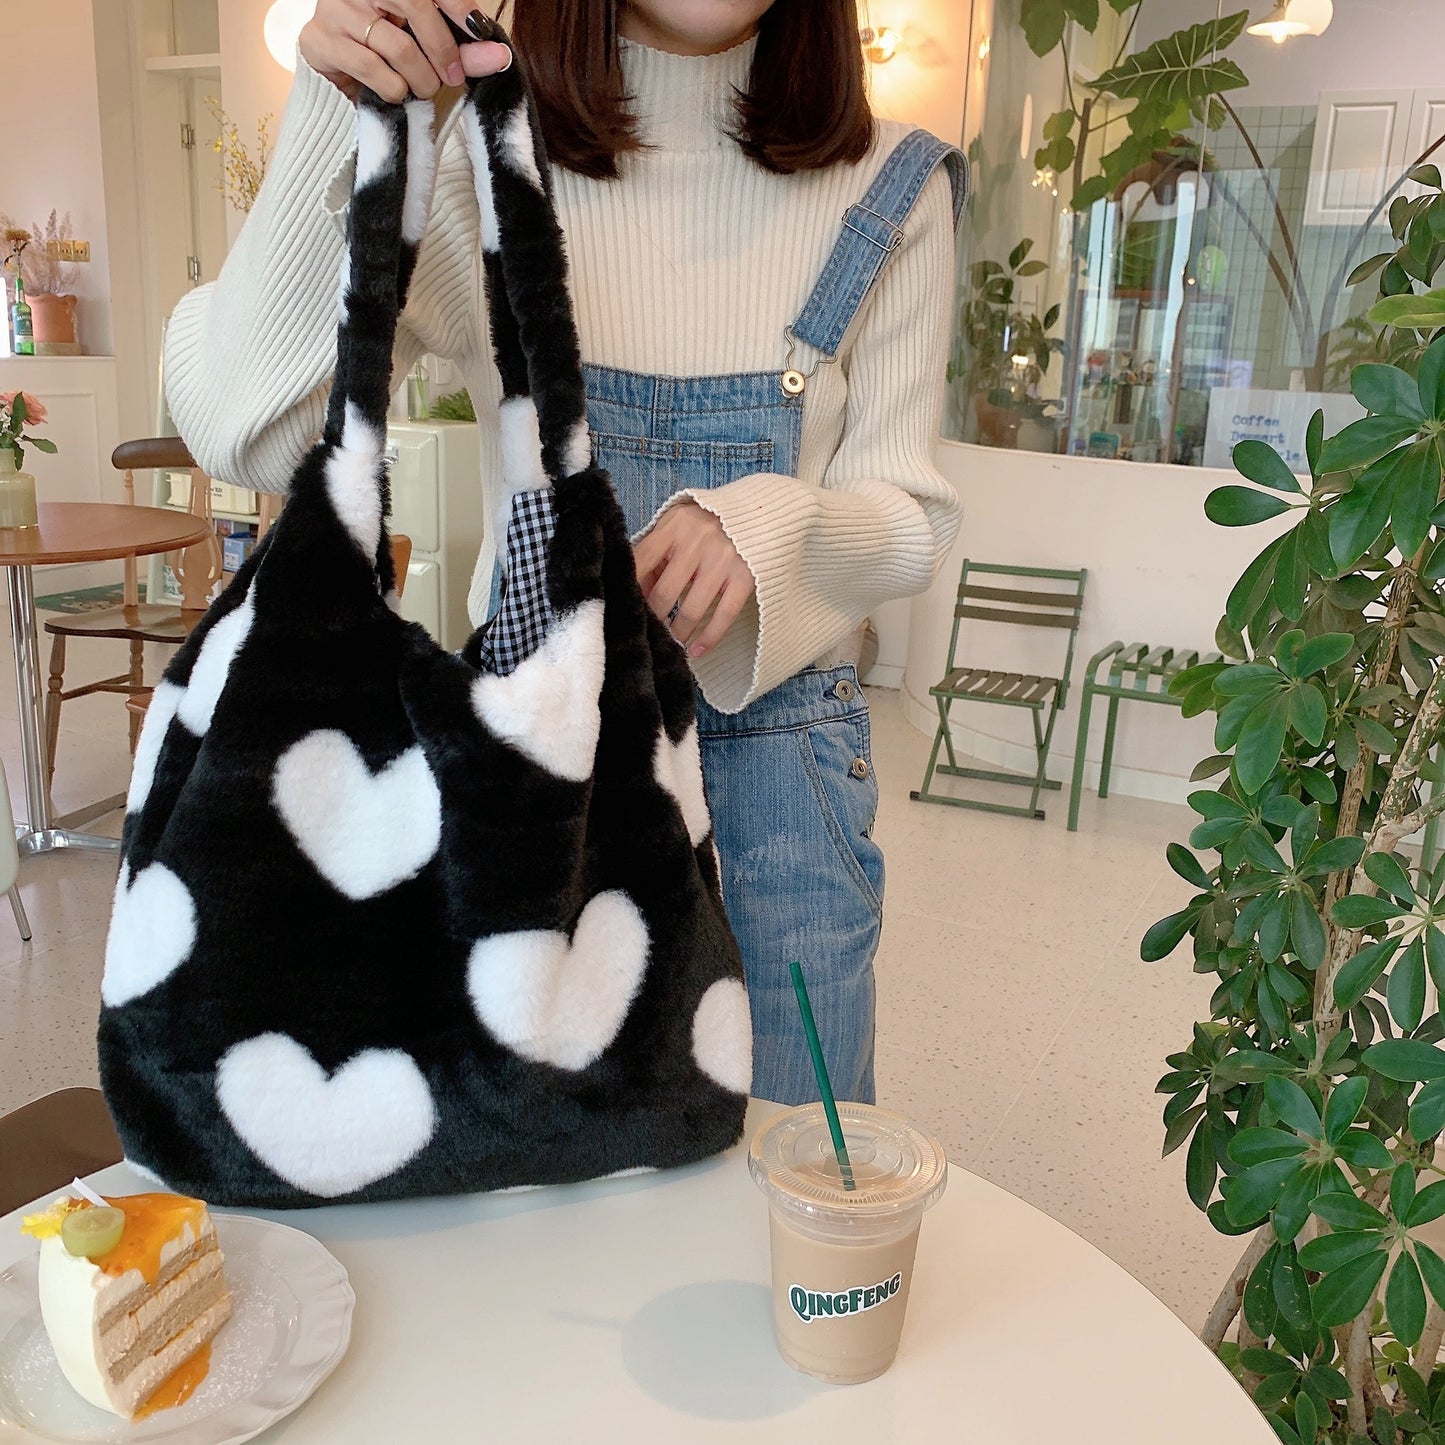 Love Hearts: Step Out in Style with Our Trendy Black and White Plush Hearts Purse